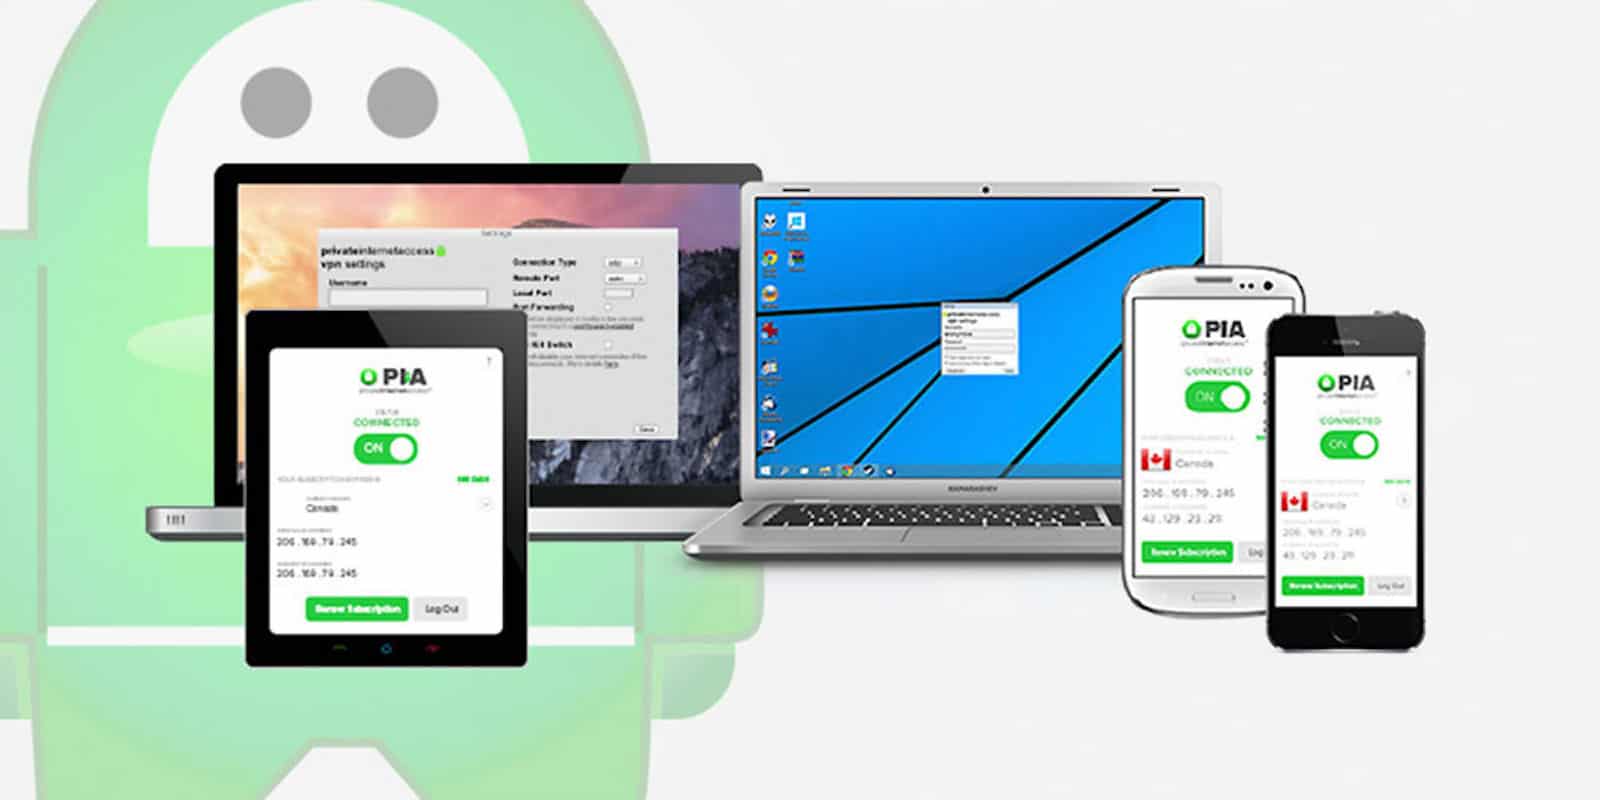 Guard your online life with fewer restrictions for a year with this great VPN deal.